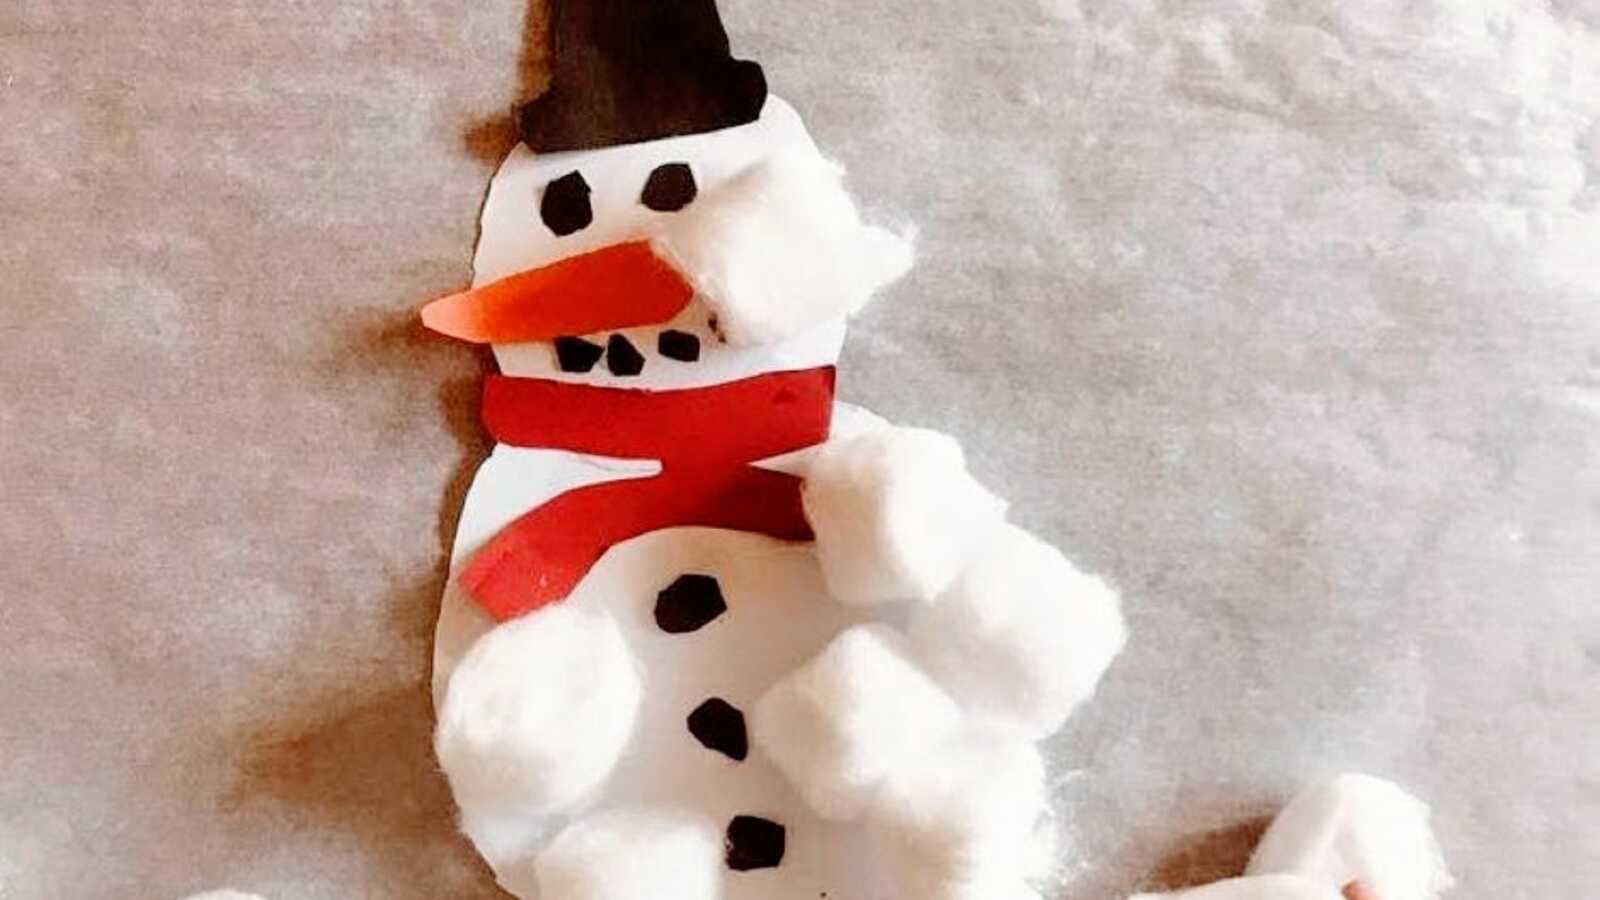 Mom takes a photo of a DIY snowman craft she did with her son